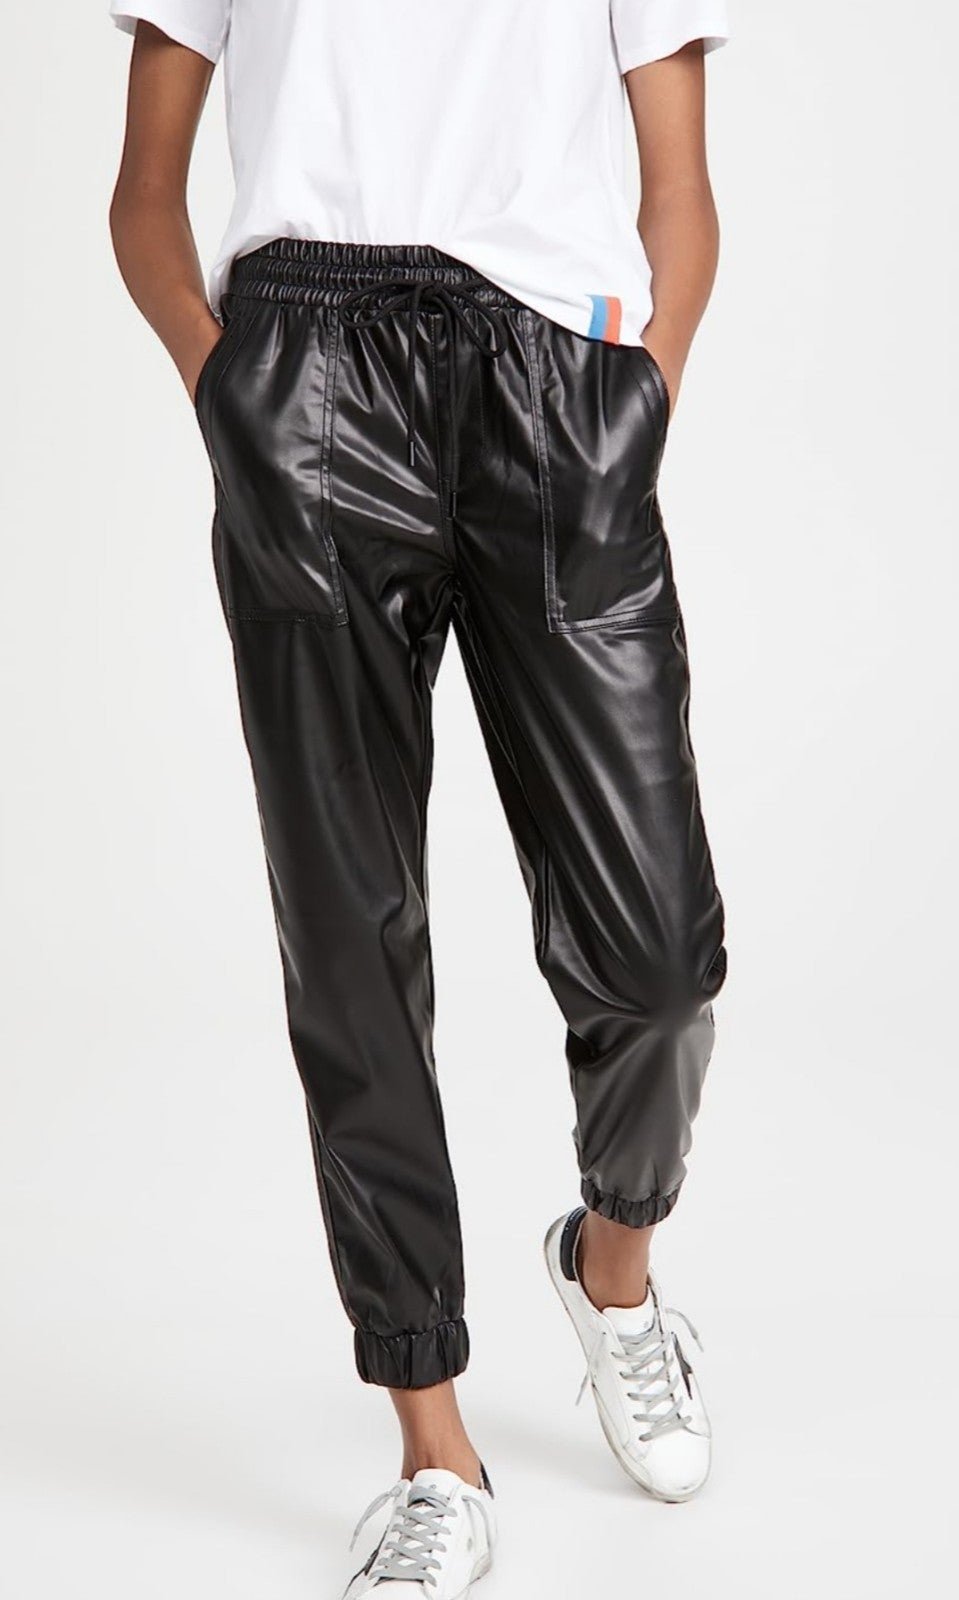 big discount Womens Vegan Leather, Comfortable & Casual Pants Size S/M nYSGRvPa0 hot sale